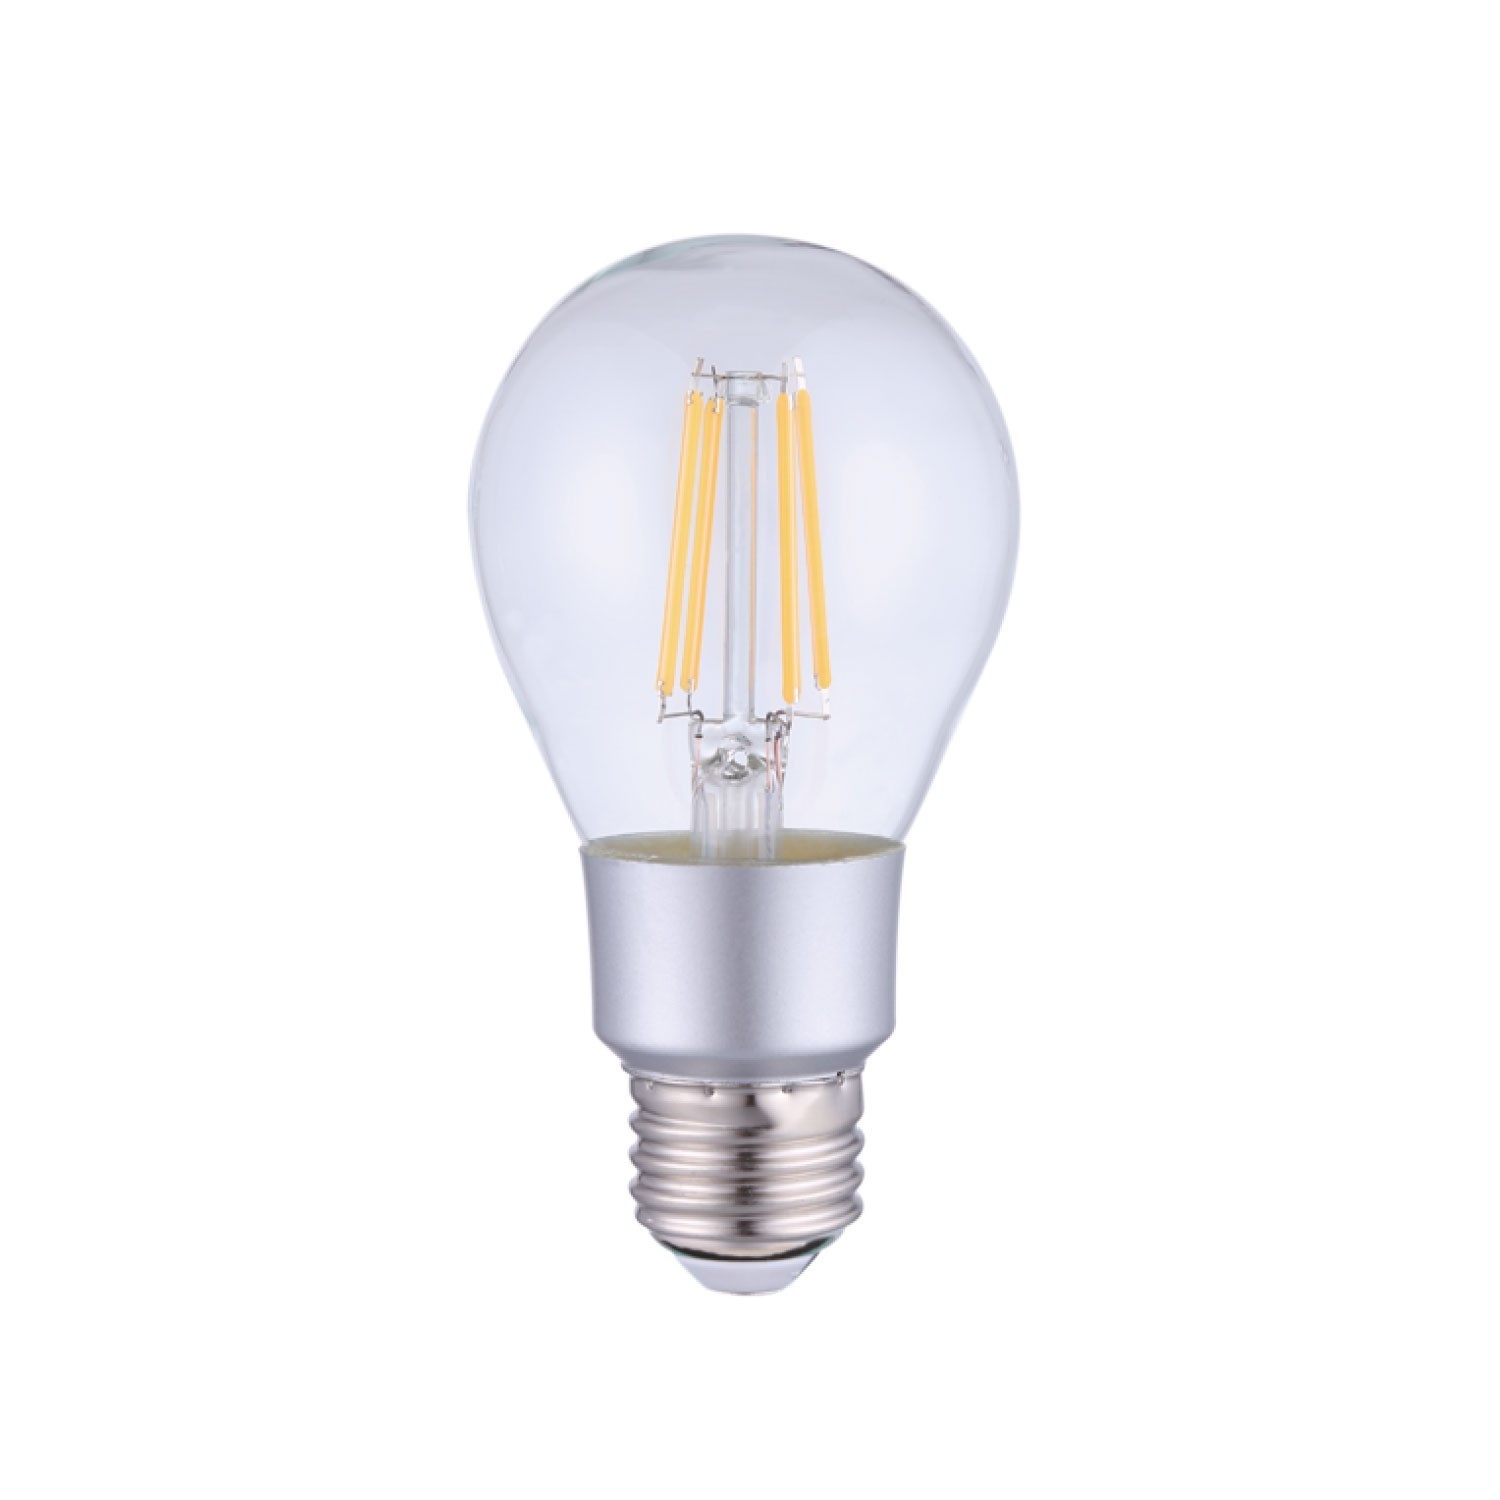 LED SMART WI-FI Light Bulb Drop A60 Transparent with Straight Filament 6W 700Lm E27 2700K Dimmable